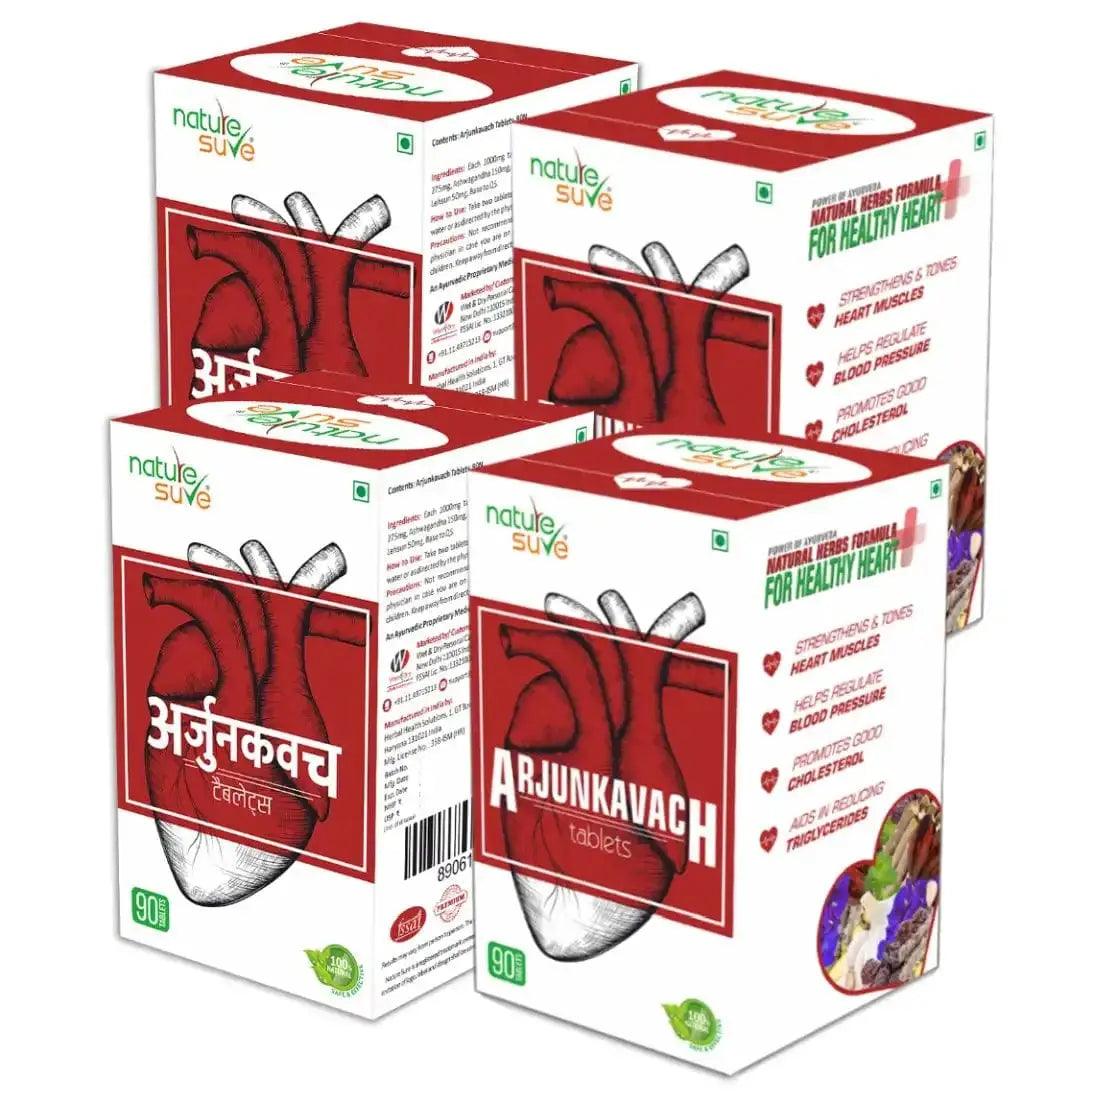 Buy 4 Packs of Nature Sure Arjun Kavach Tablets for Healthy Heart in Men and Women